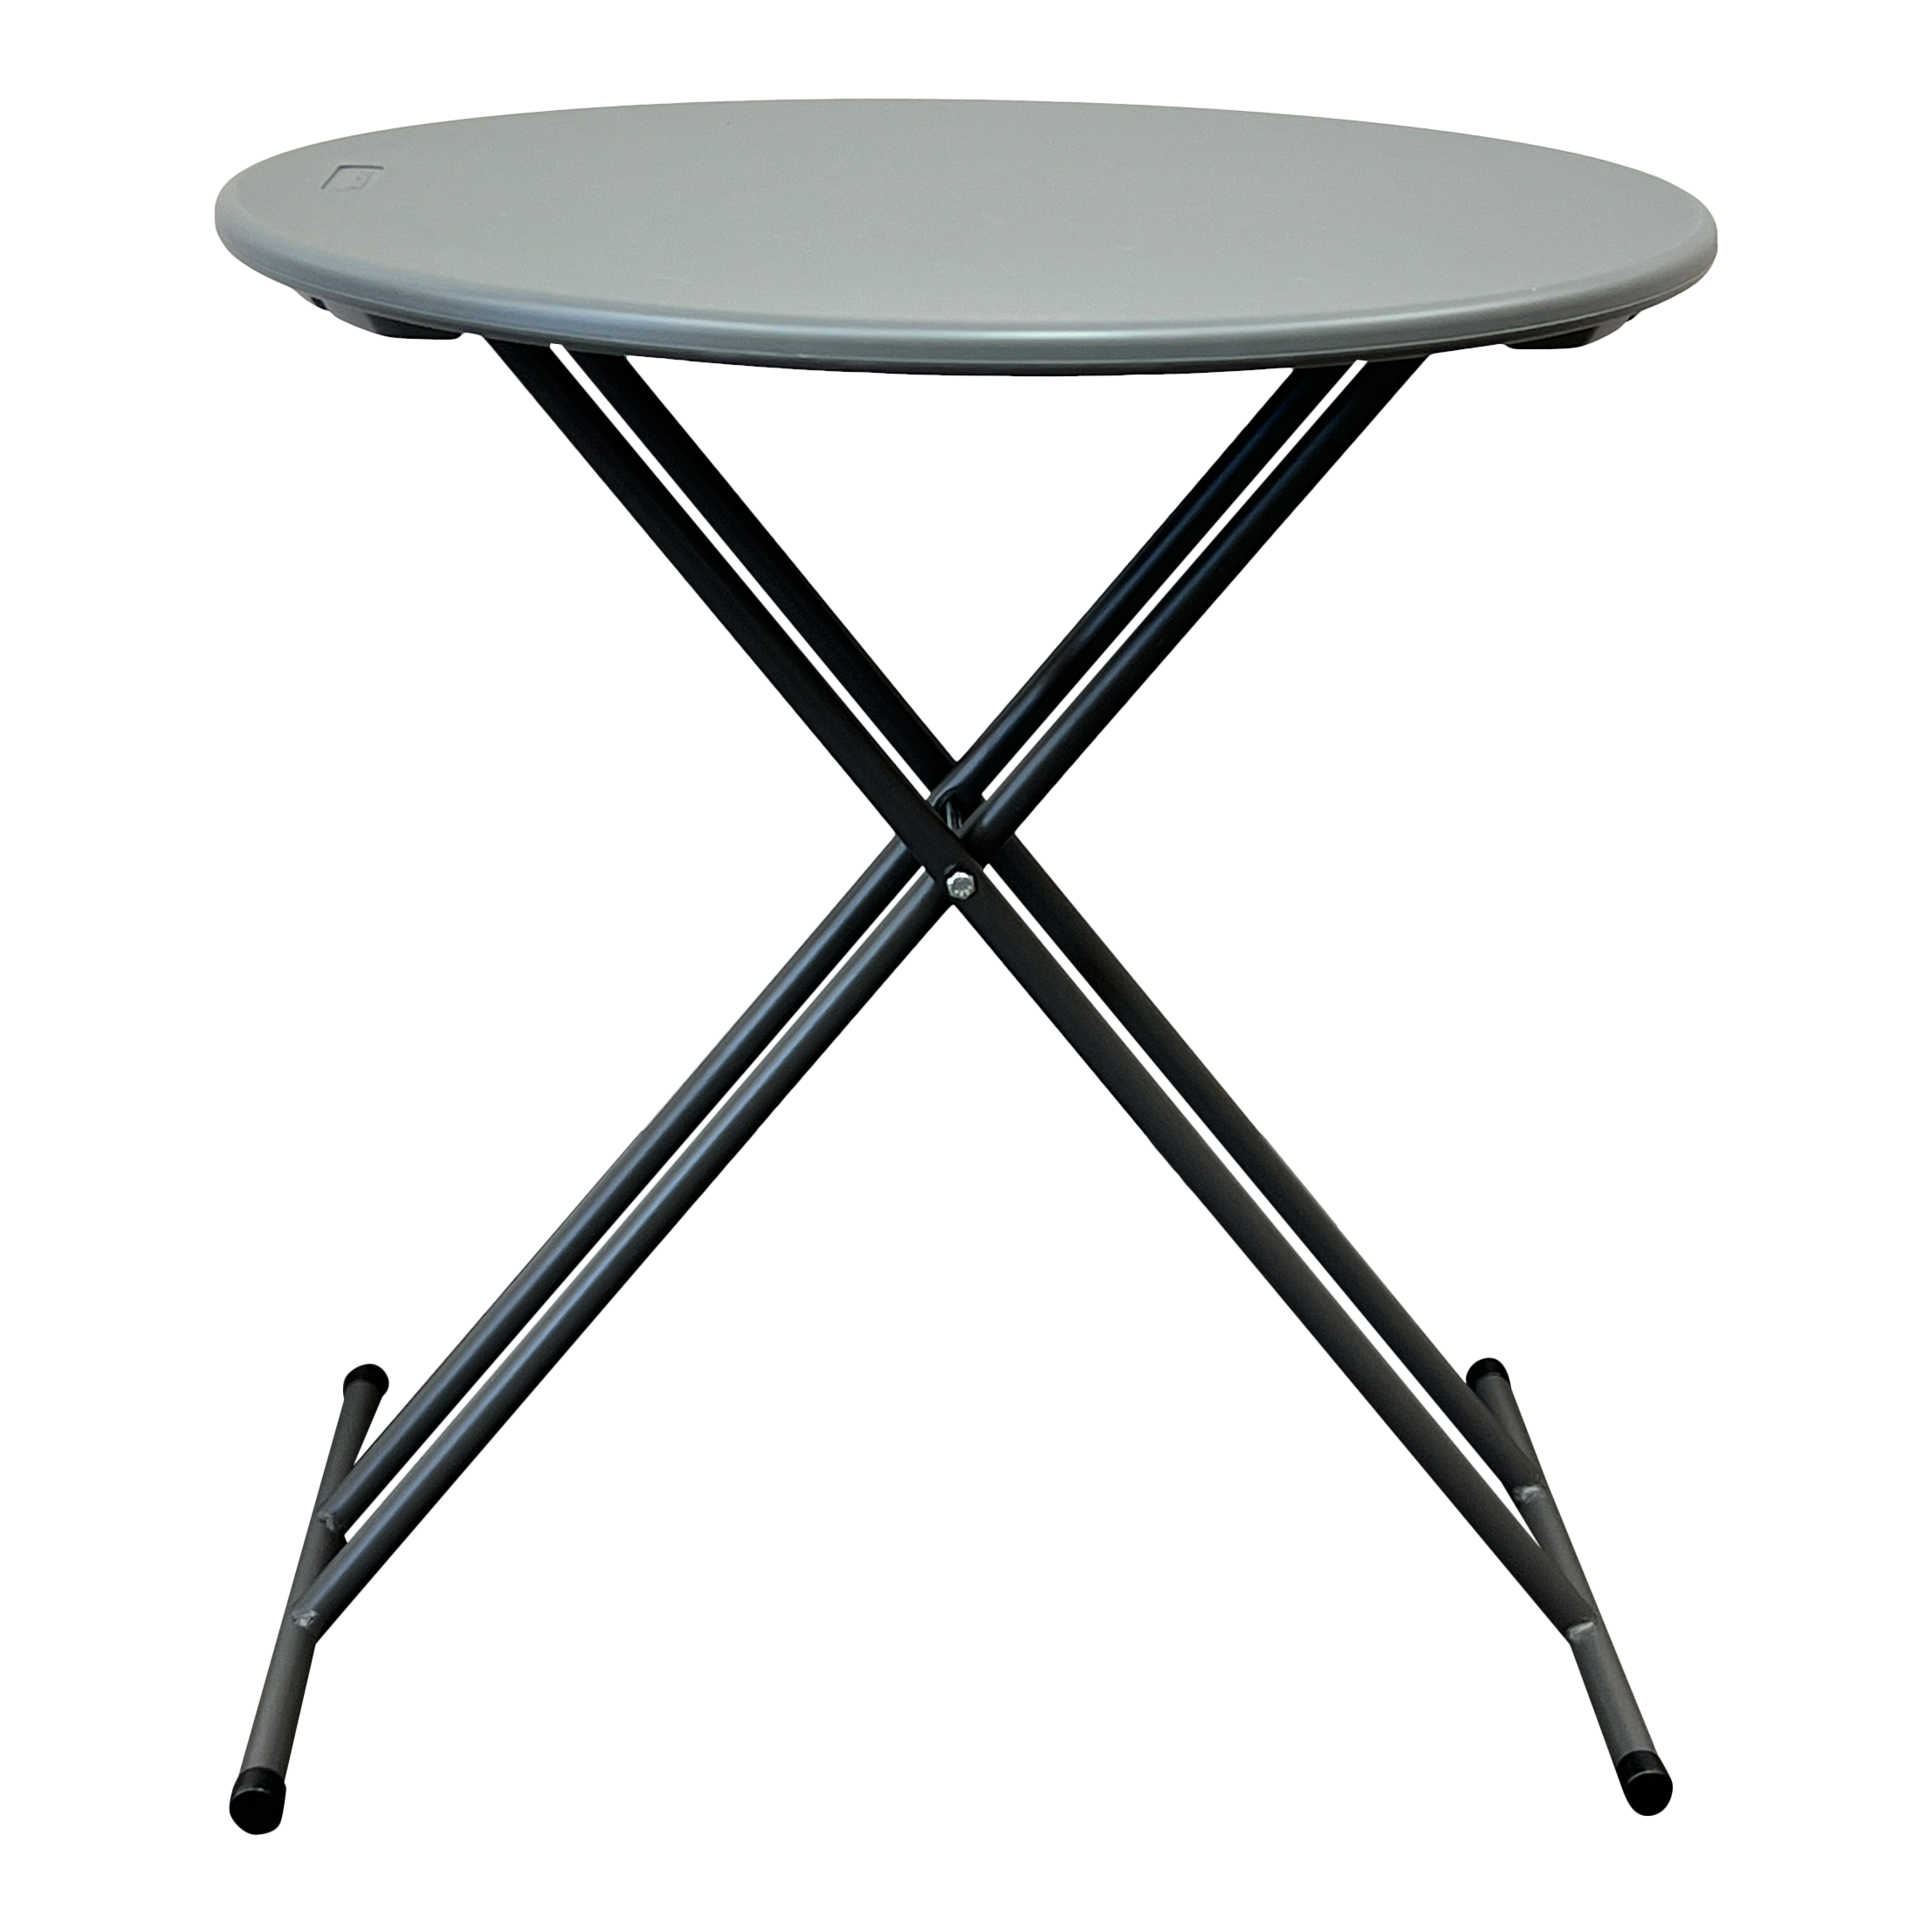 A personal 24" round charcoal table.